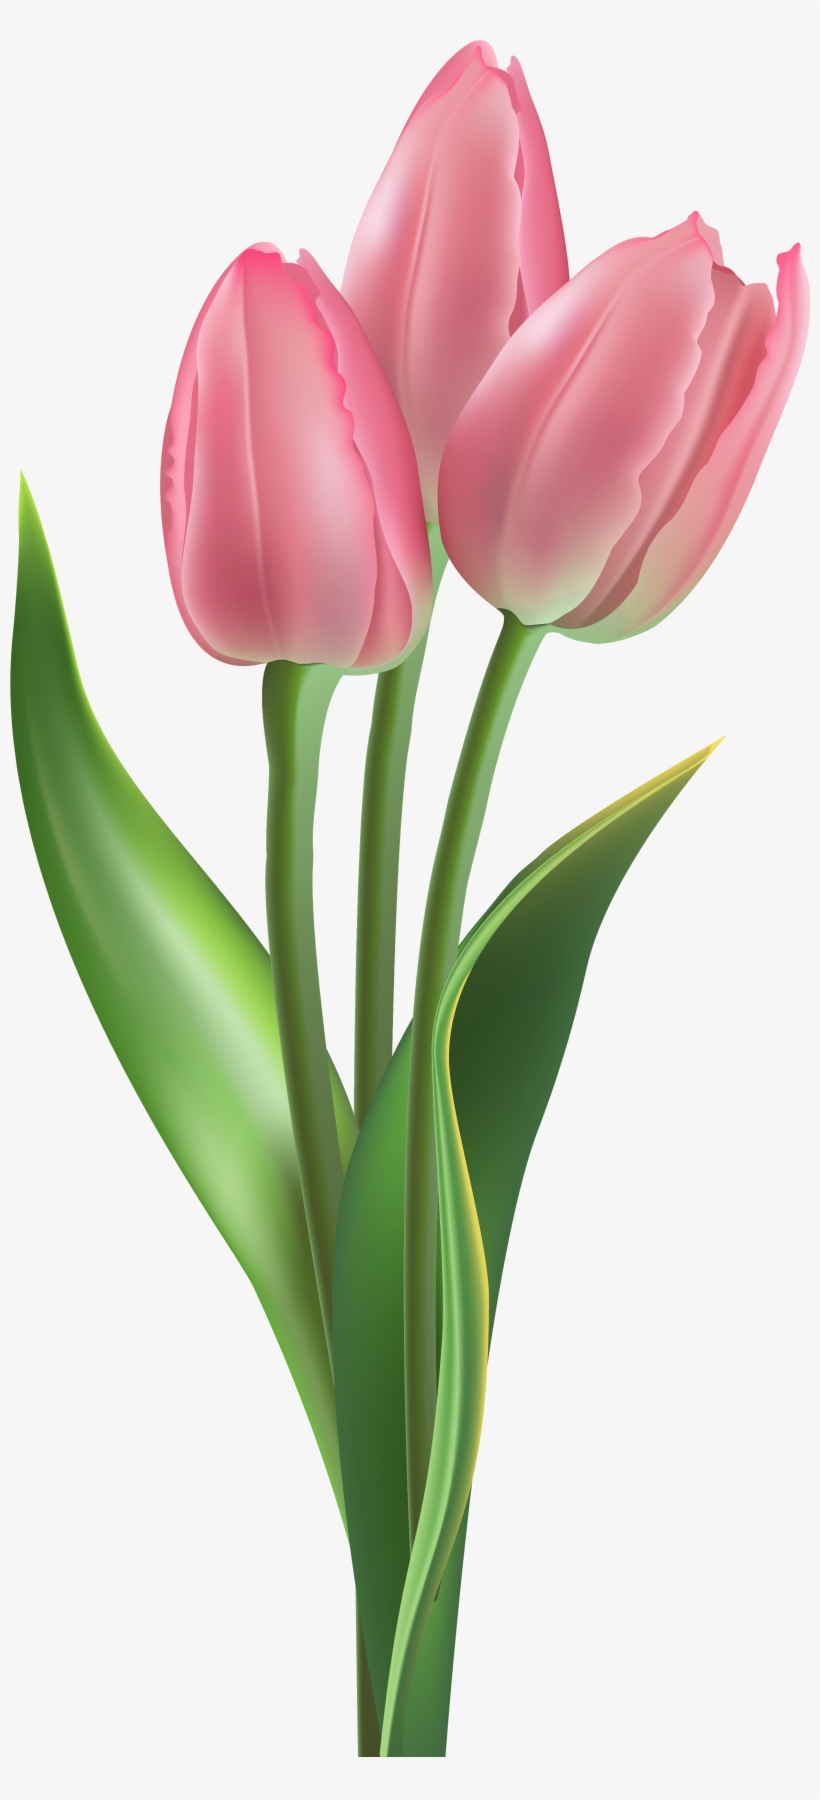 Soft Pink Tulips Png Clipart Image - Pink Tulip Png, transparent png #501030